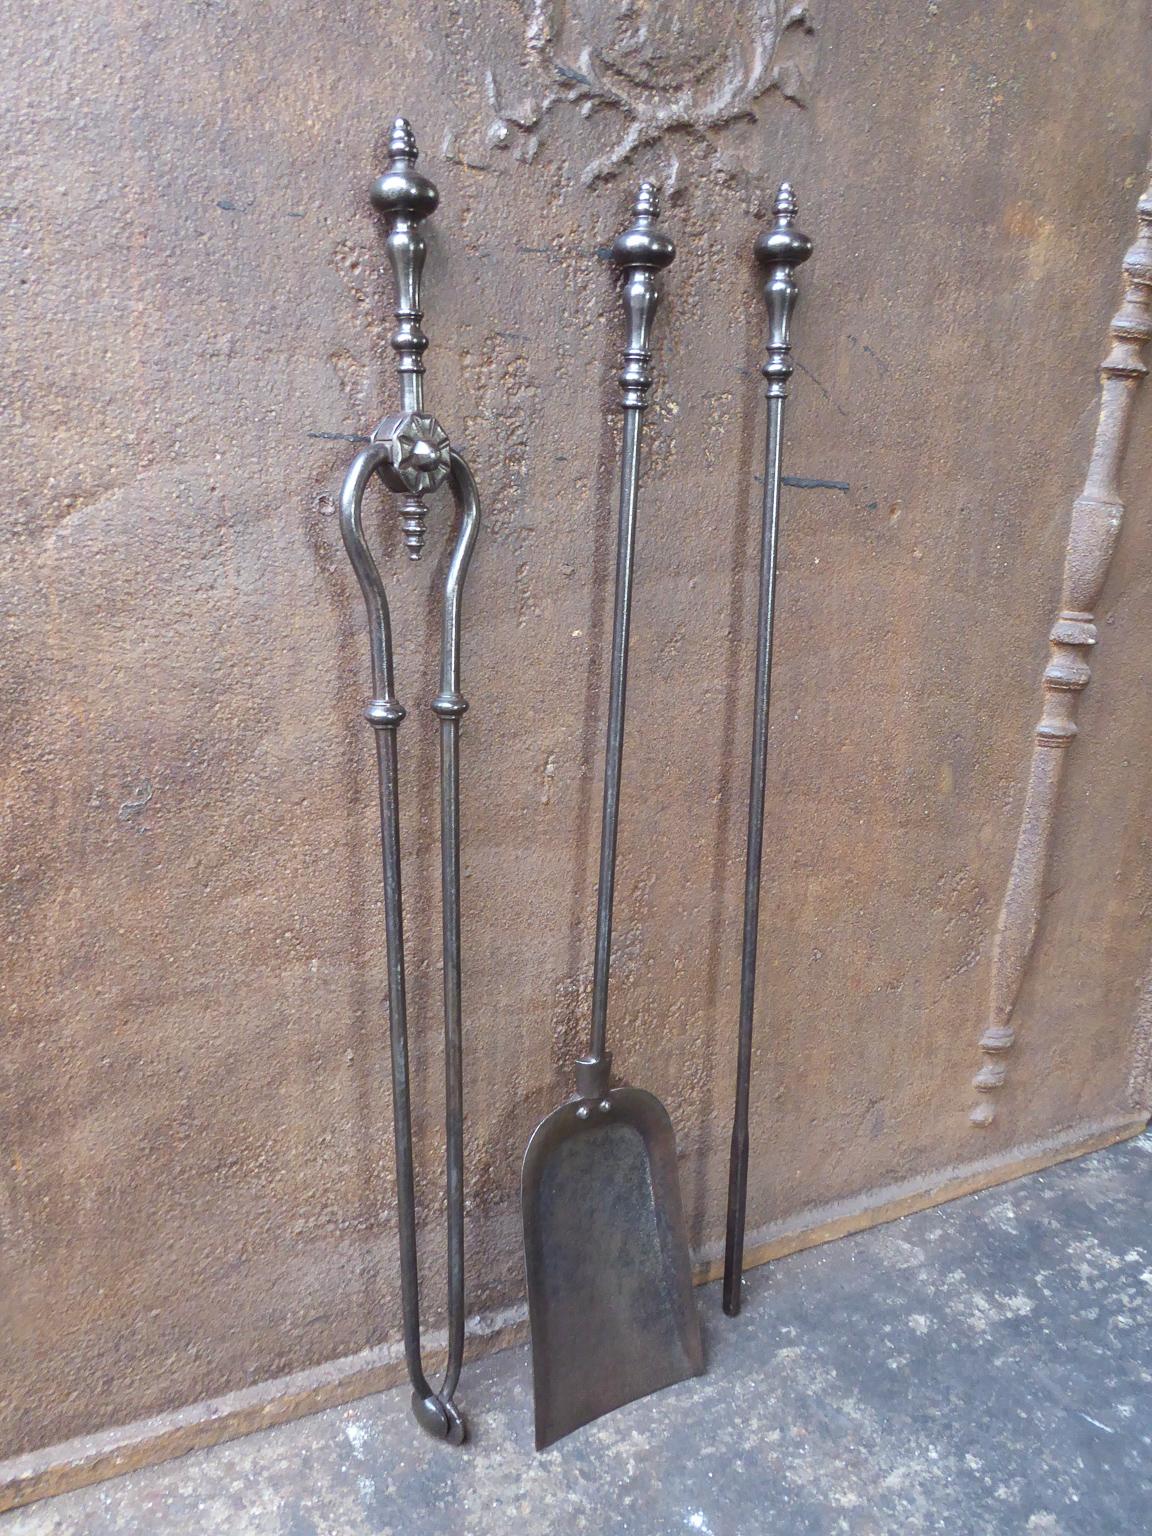 19th century English Victorian set of fireplace tools. The tools are made of wrought iron. The set is in a good condition and is fully functional.

We have a unique and specialized collection of antique and used fireplace accessories consisting of